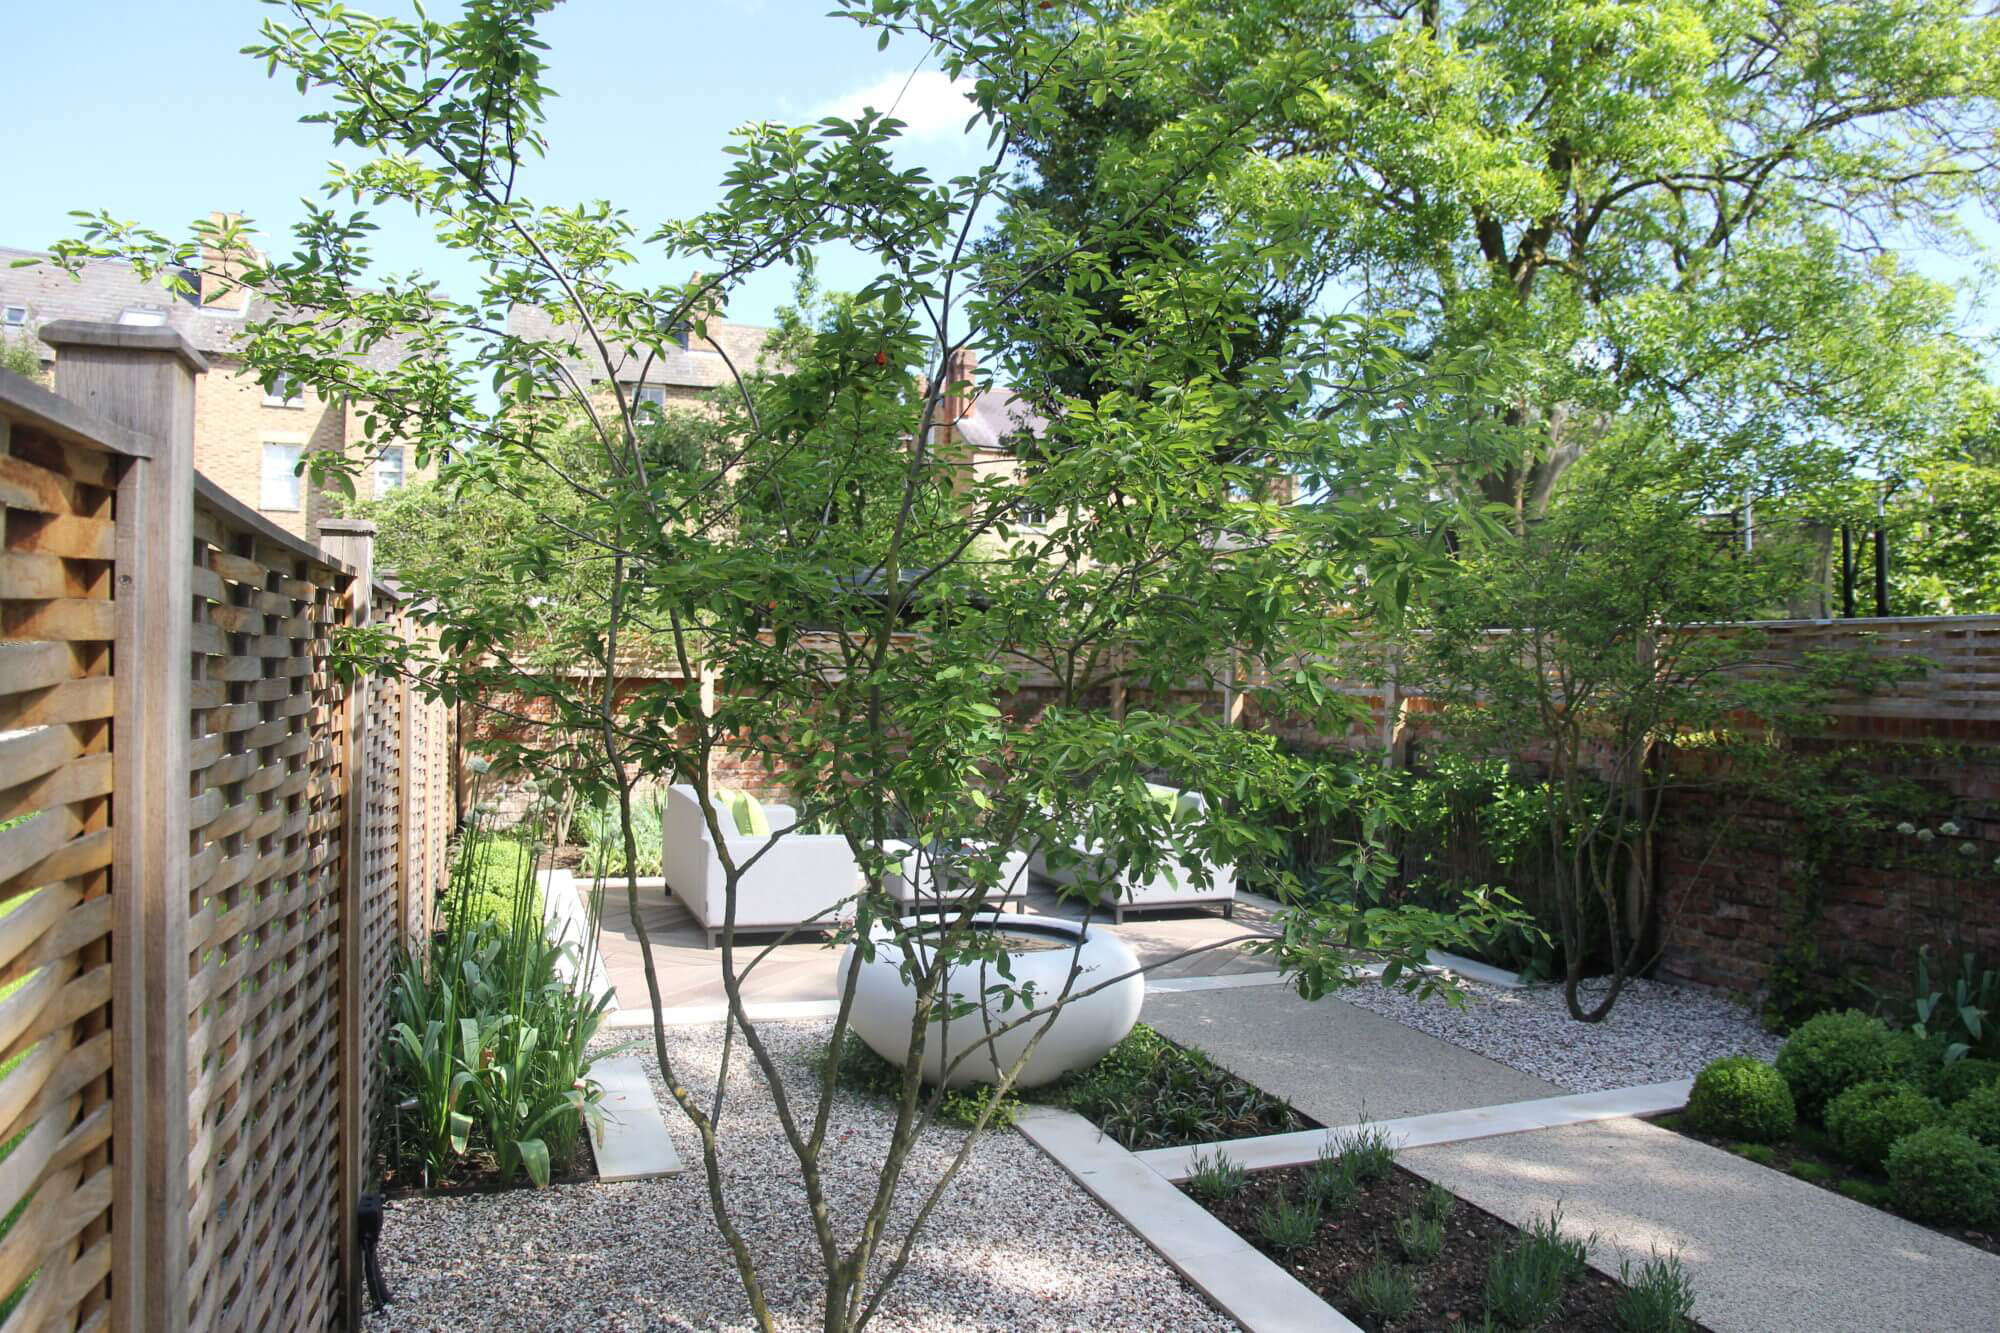 Quercus fencing and elegant planting in an Oxford townhouse garden